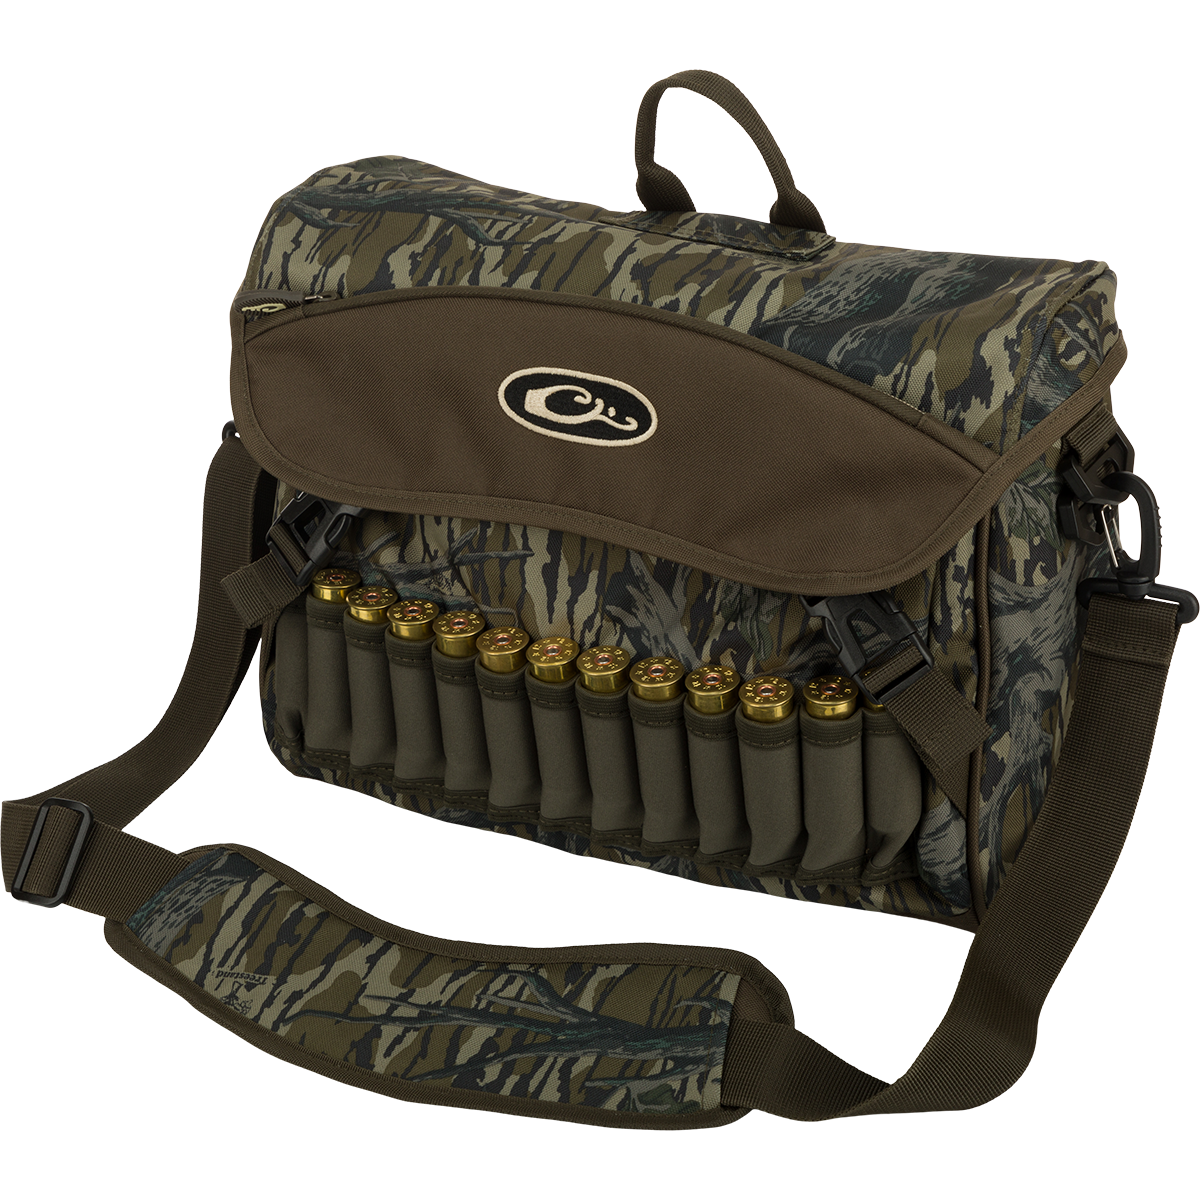 Drake Waterfowl Systems High and Dry Blind Bag | Bass Pro Shops